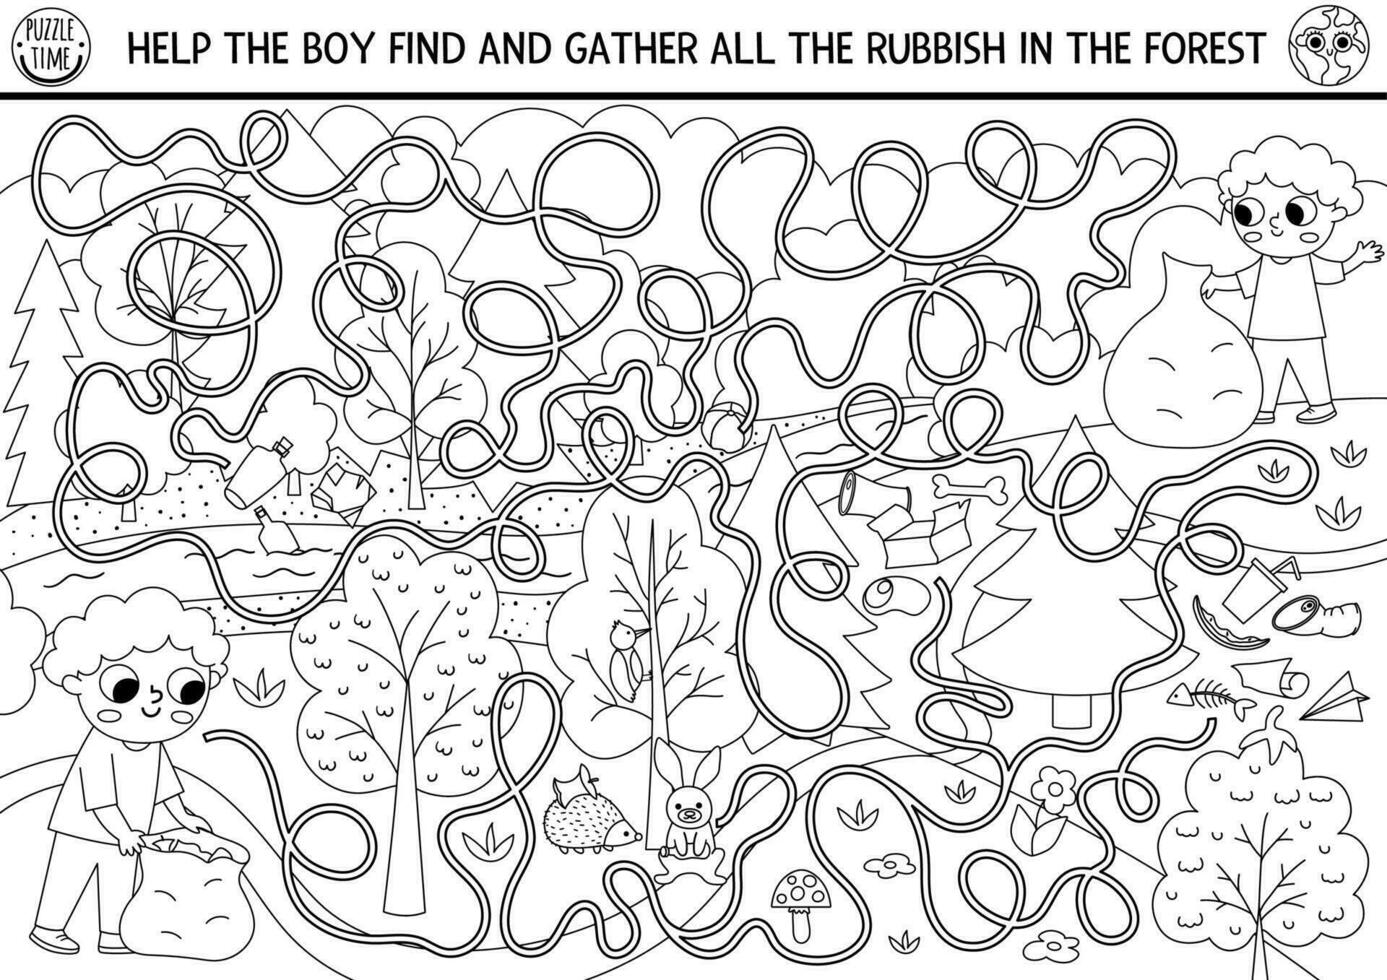 Ecological black and white maze for children with kid gathering garbage in forest. Earth day preschool activity. Eco awareness labyrinth game, puzzle. Nature protection printable coloring page vector